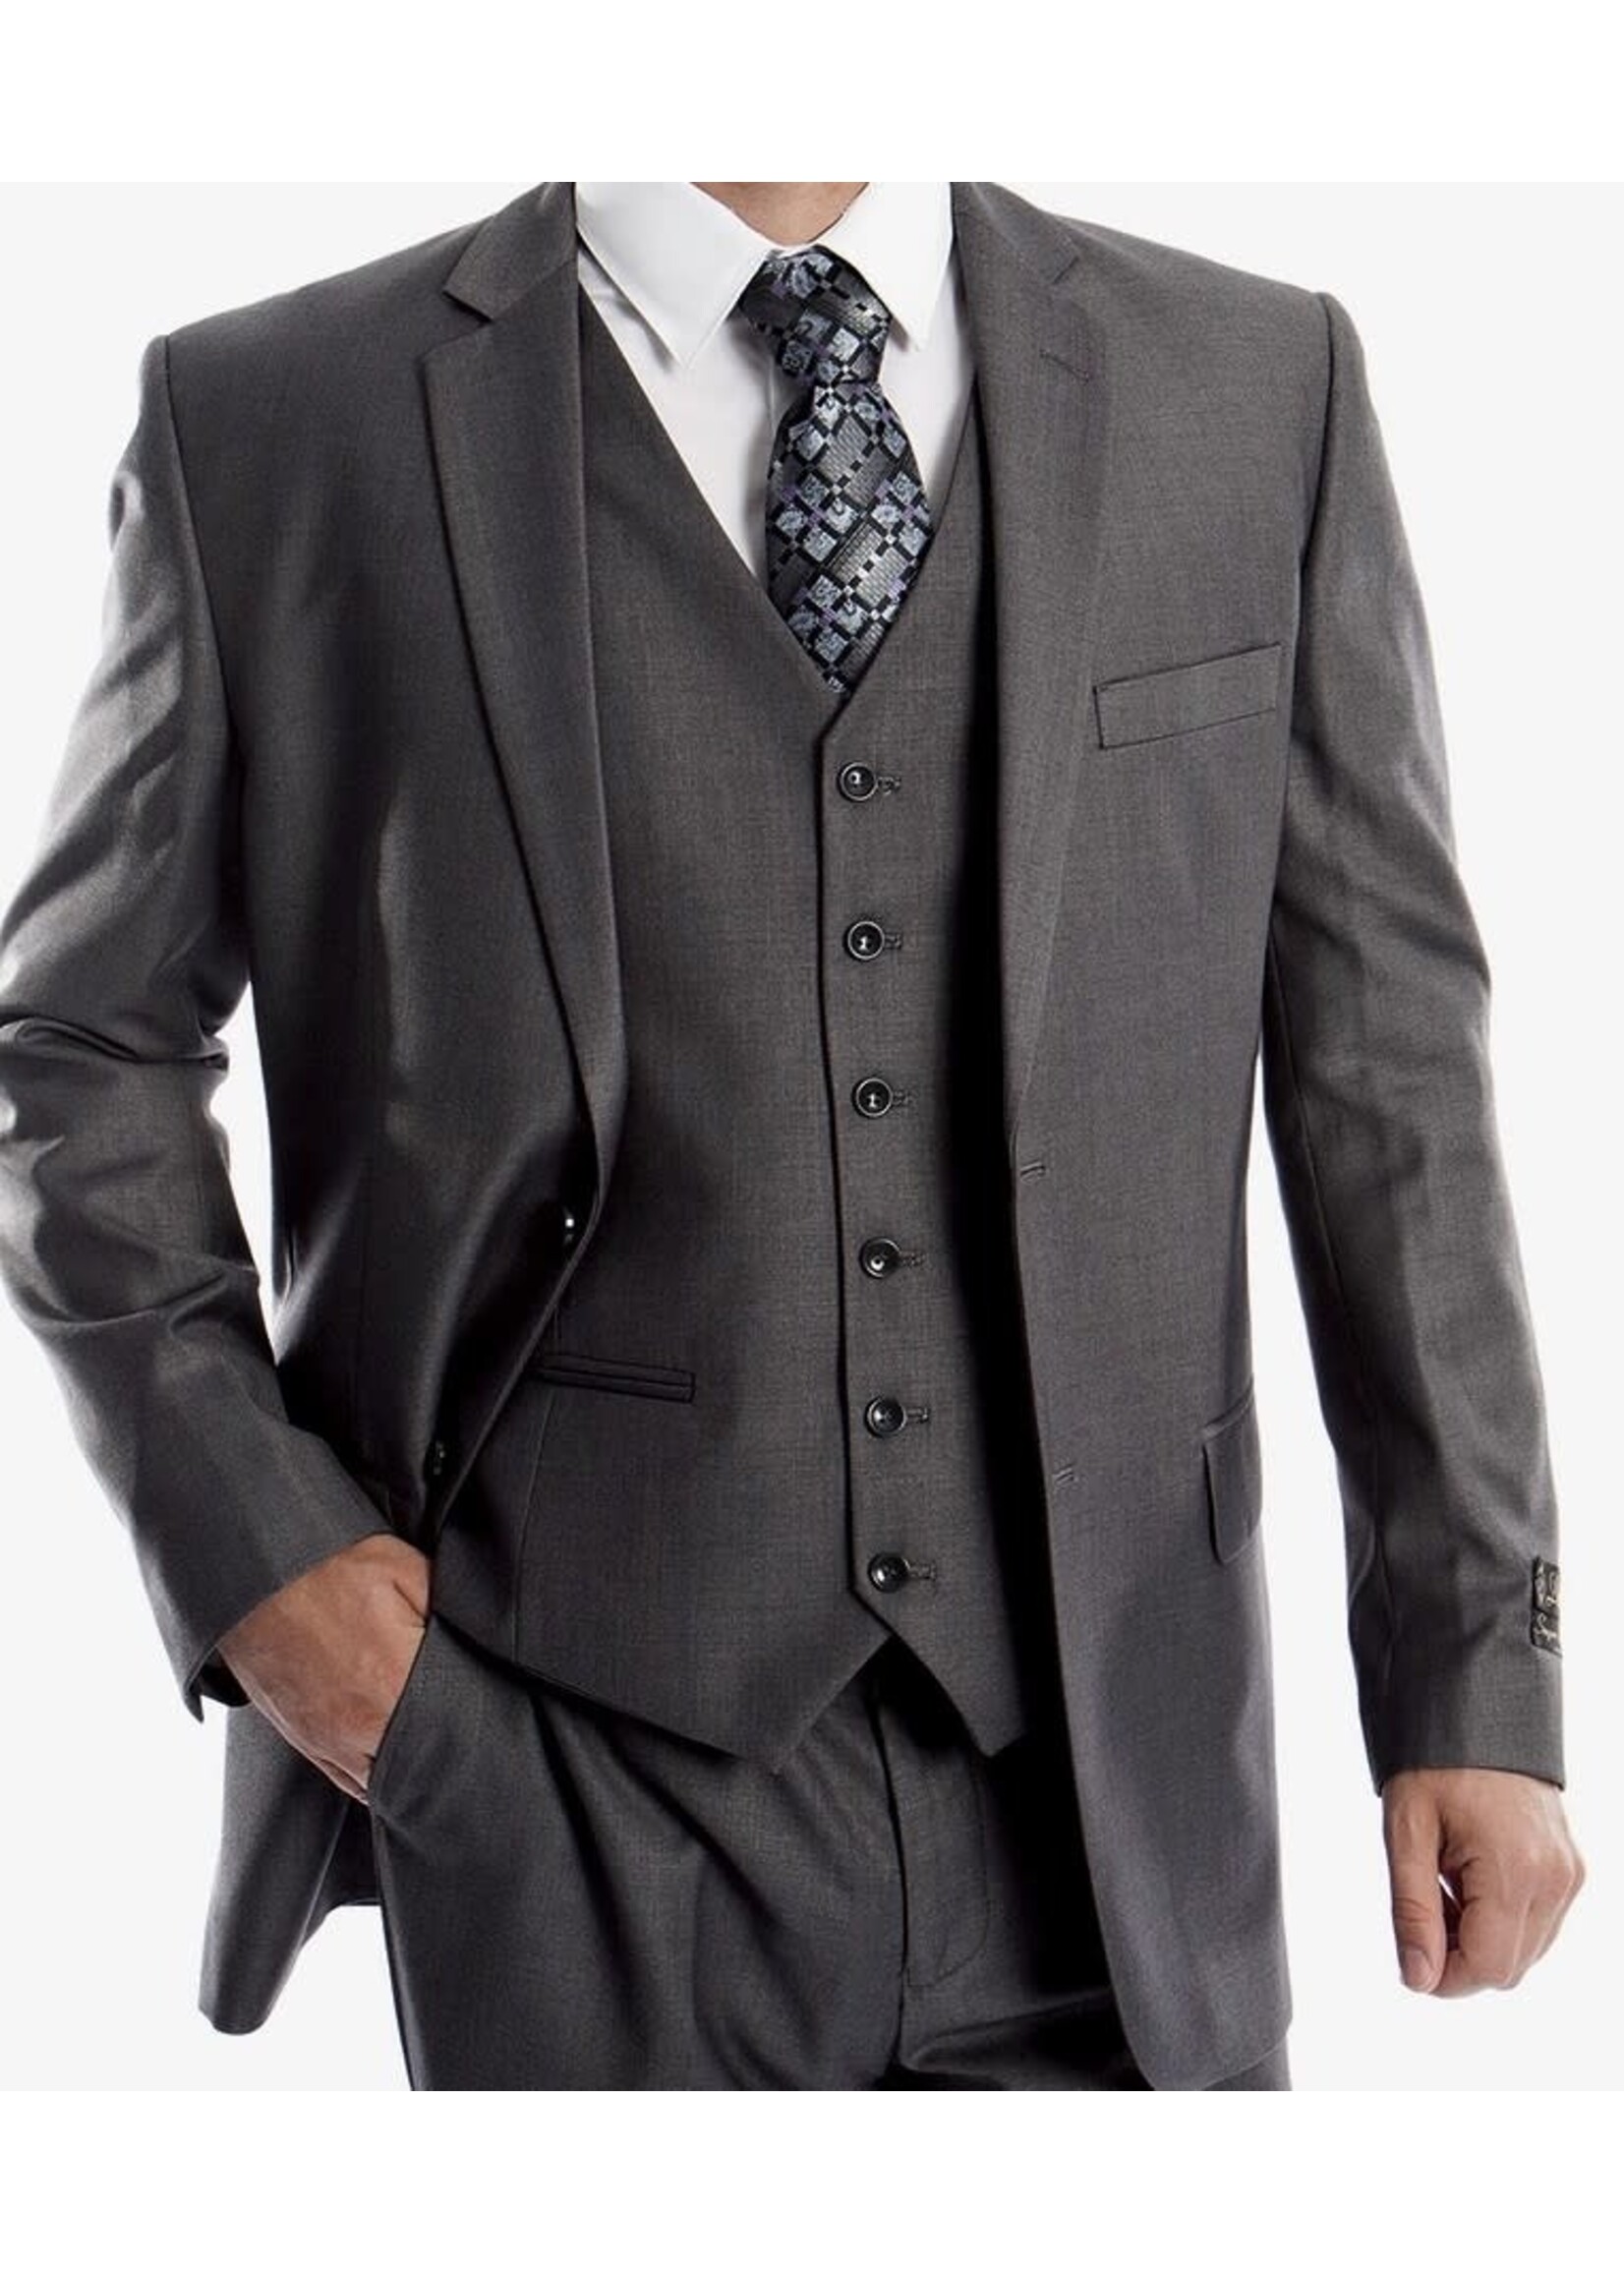 WHIWS302 - MENS SUIT LIGHT GREY